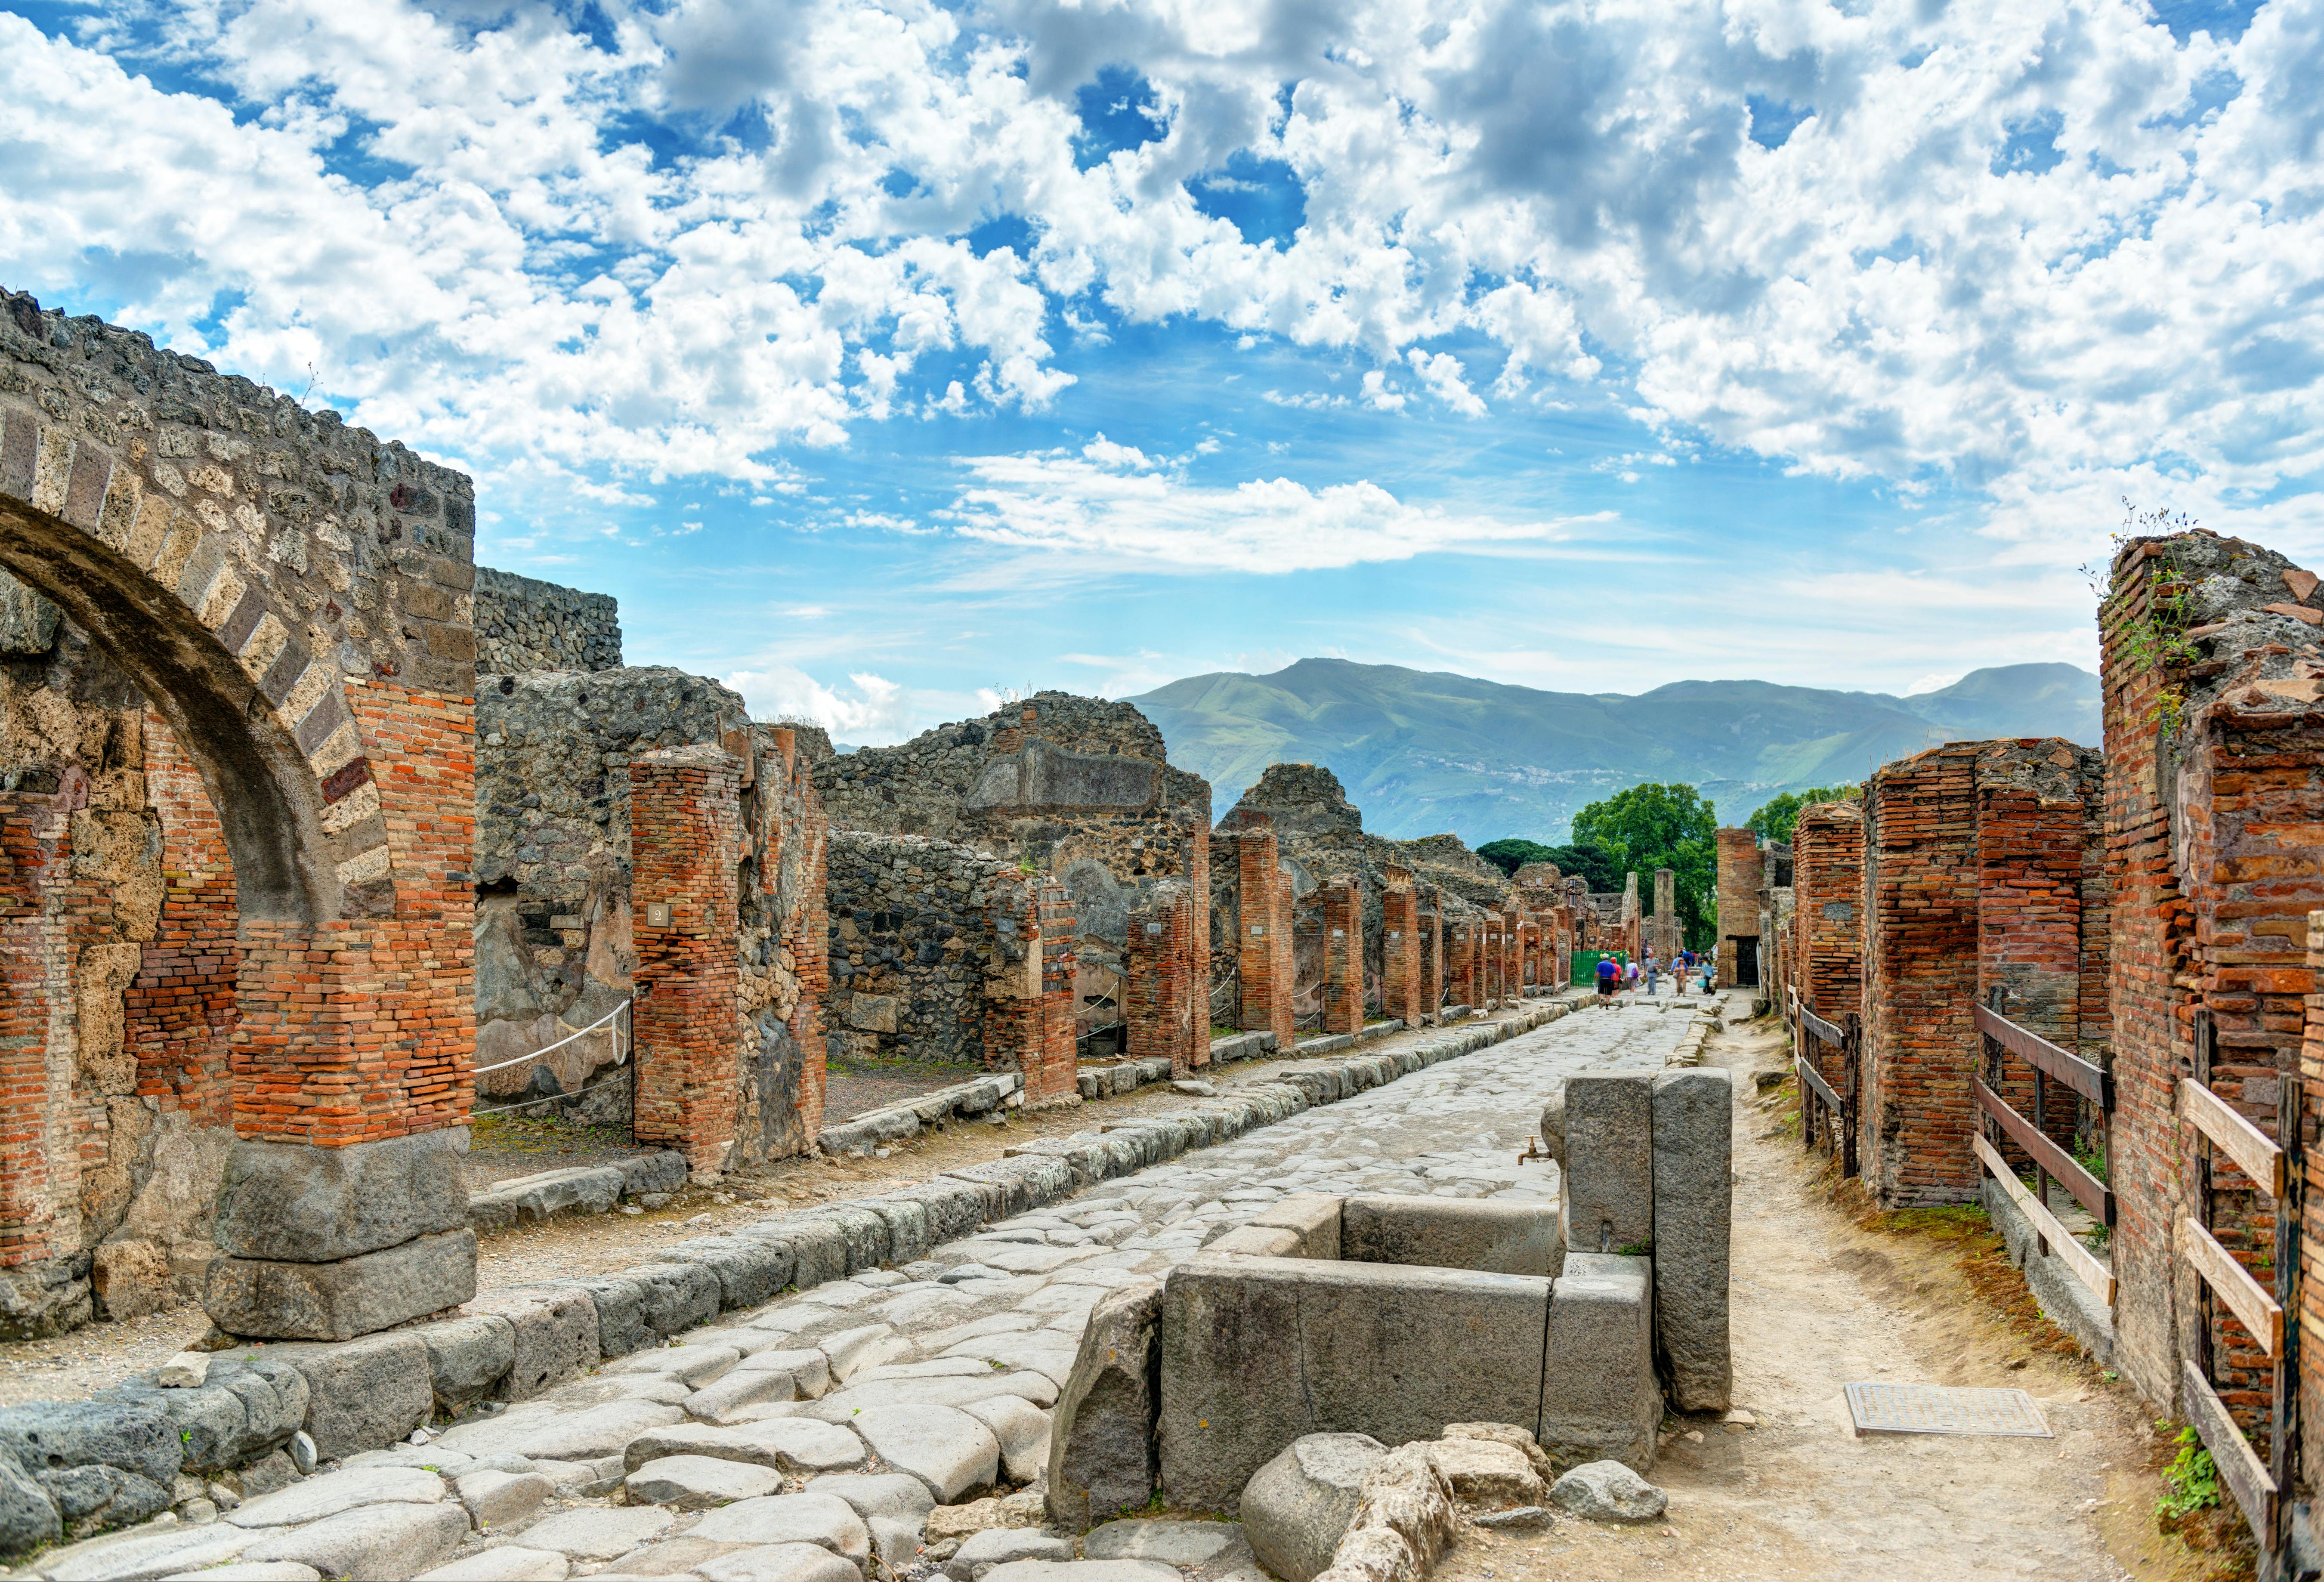 Archaeological site of Pompeii Iconic Insiders small-group tour with a local guide boeken?